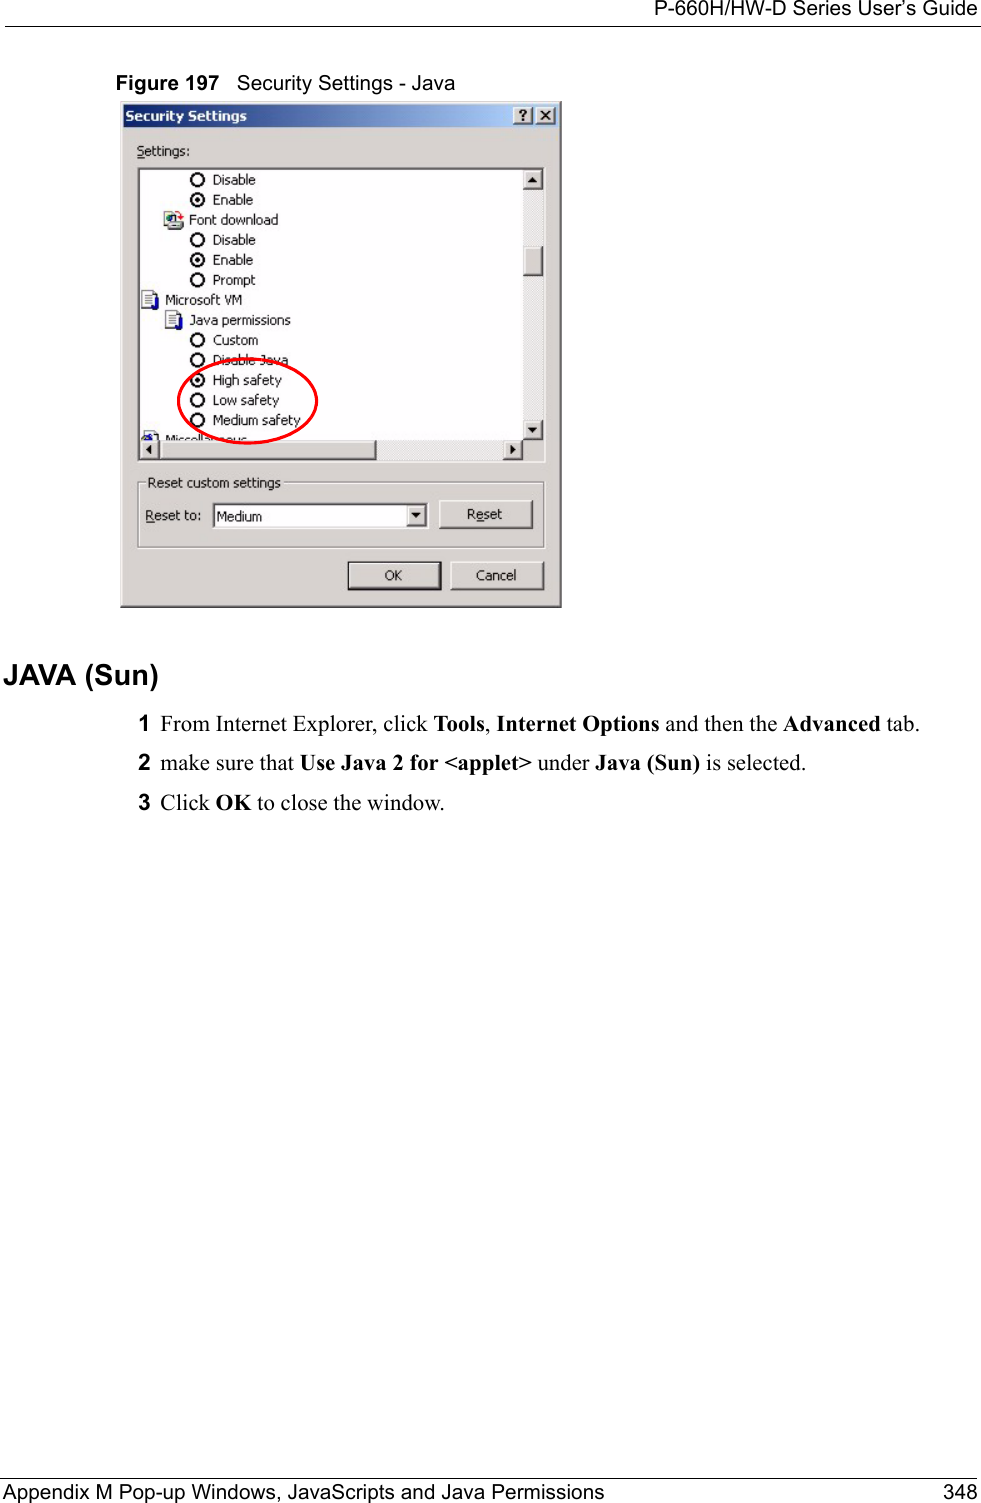 P-660H/HW-D Series User’s GuideAppendix M Pop-up Windows, JavaScripts and Java Permissions 348Figure 197   Security Settings - Java JAVA (Sun)1From Internet Explorer, click Tools, Internet Options and then the Advanced tab. 2make sure that Use Java 2 for &lt;applet&gt; under Java (Sun) is selected.3Click OK to close the window.